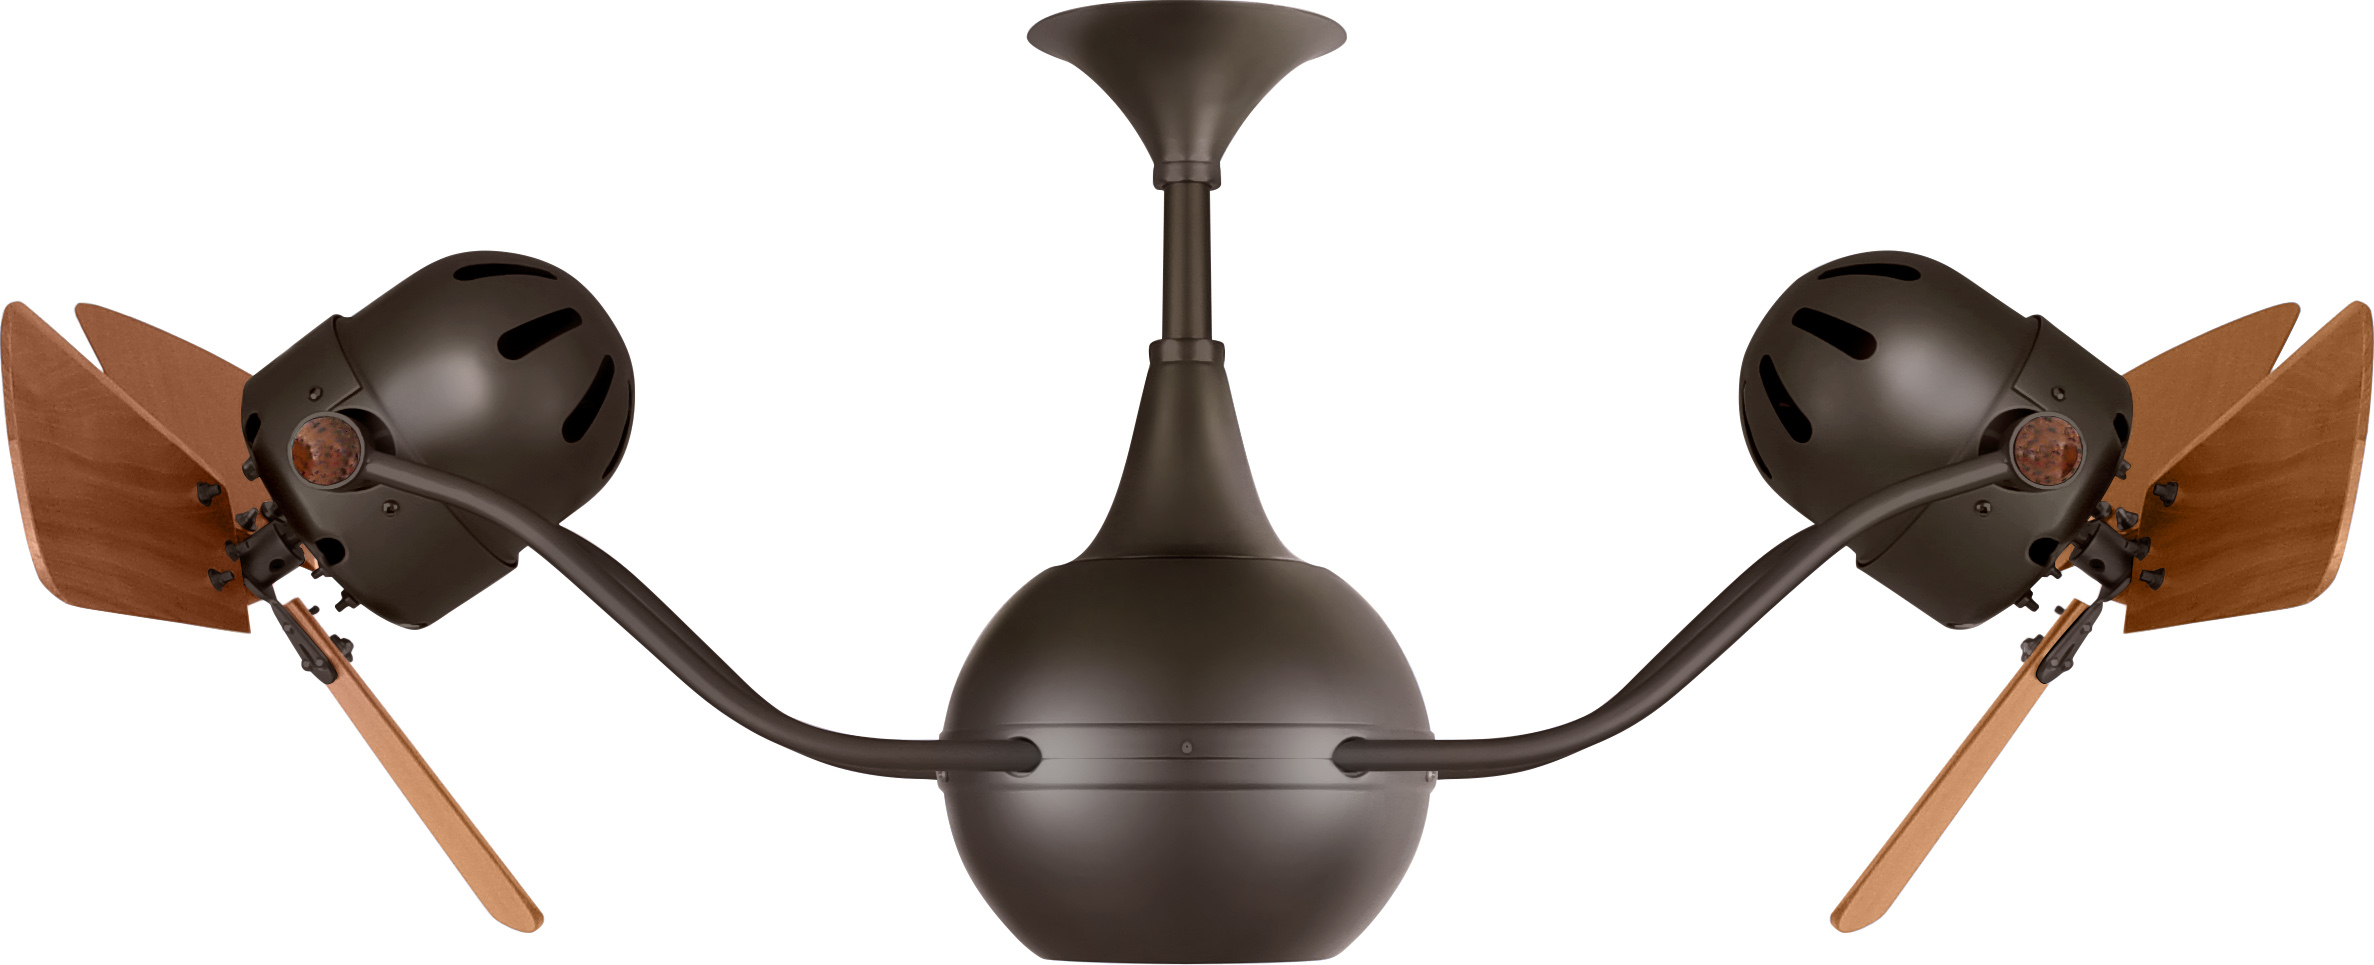 Vent-Bettina rotational dual head ceiling fan in Bronzette finish with Mahogany wood blades made by Matthews Fan Company.